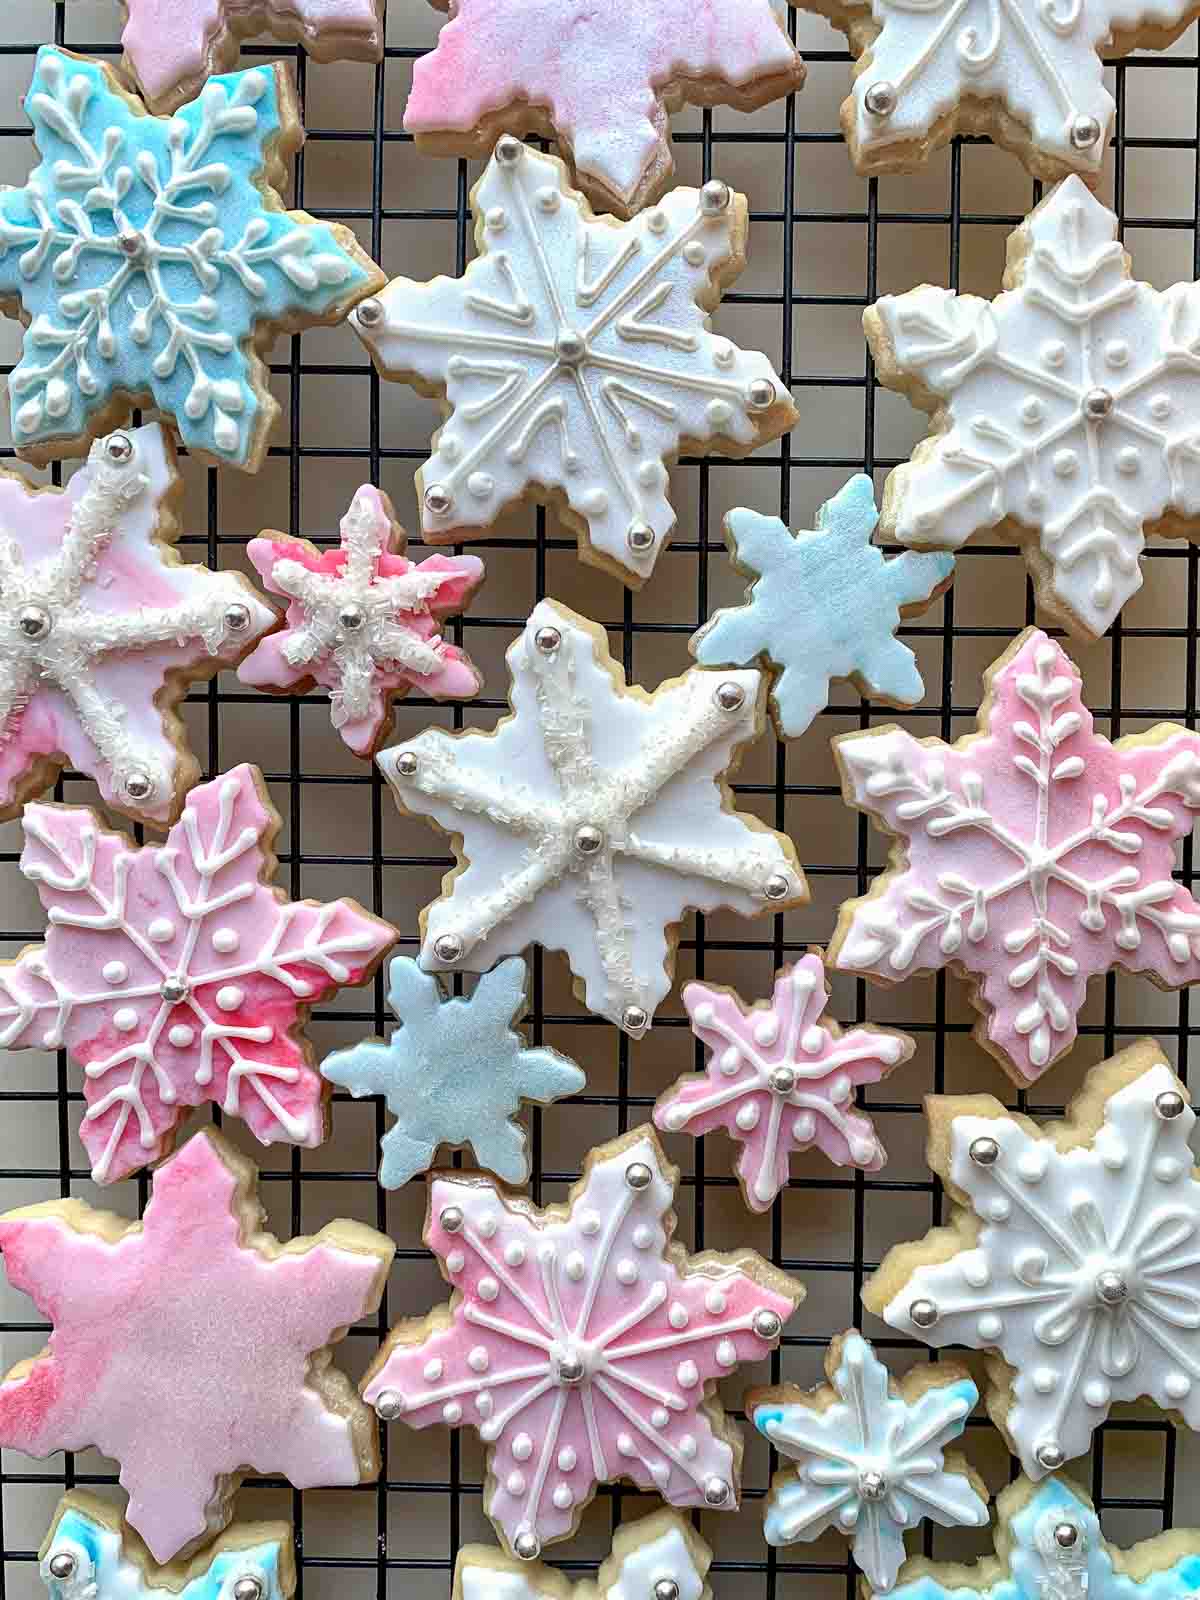 decorated sugar cookies on black wire rack viewed from above.